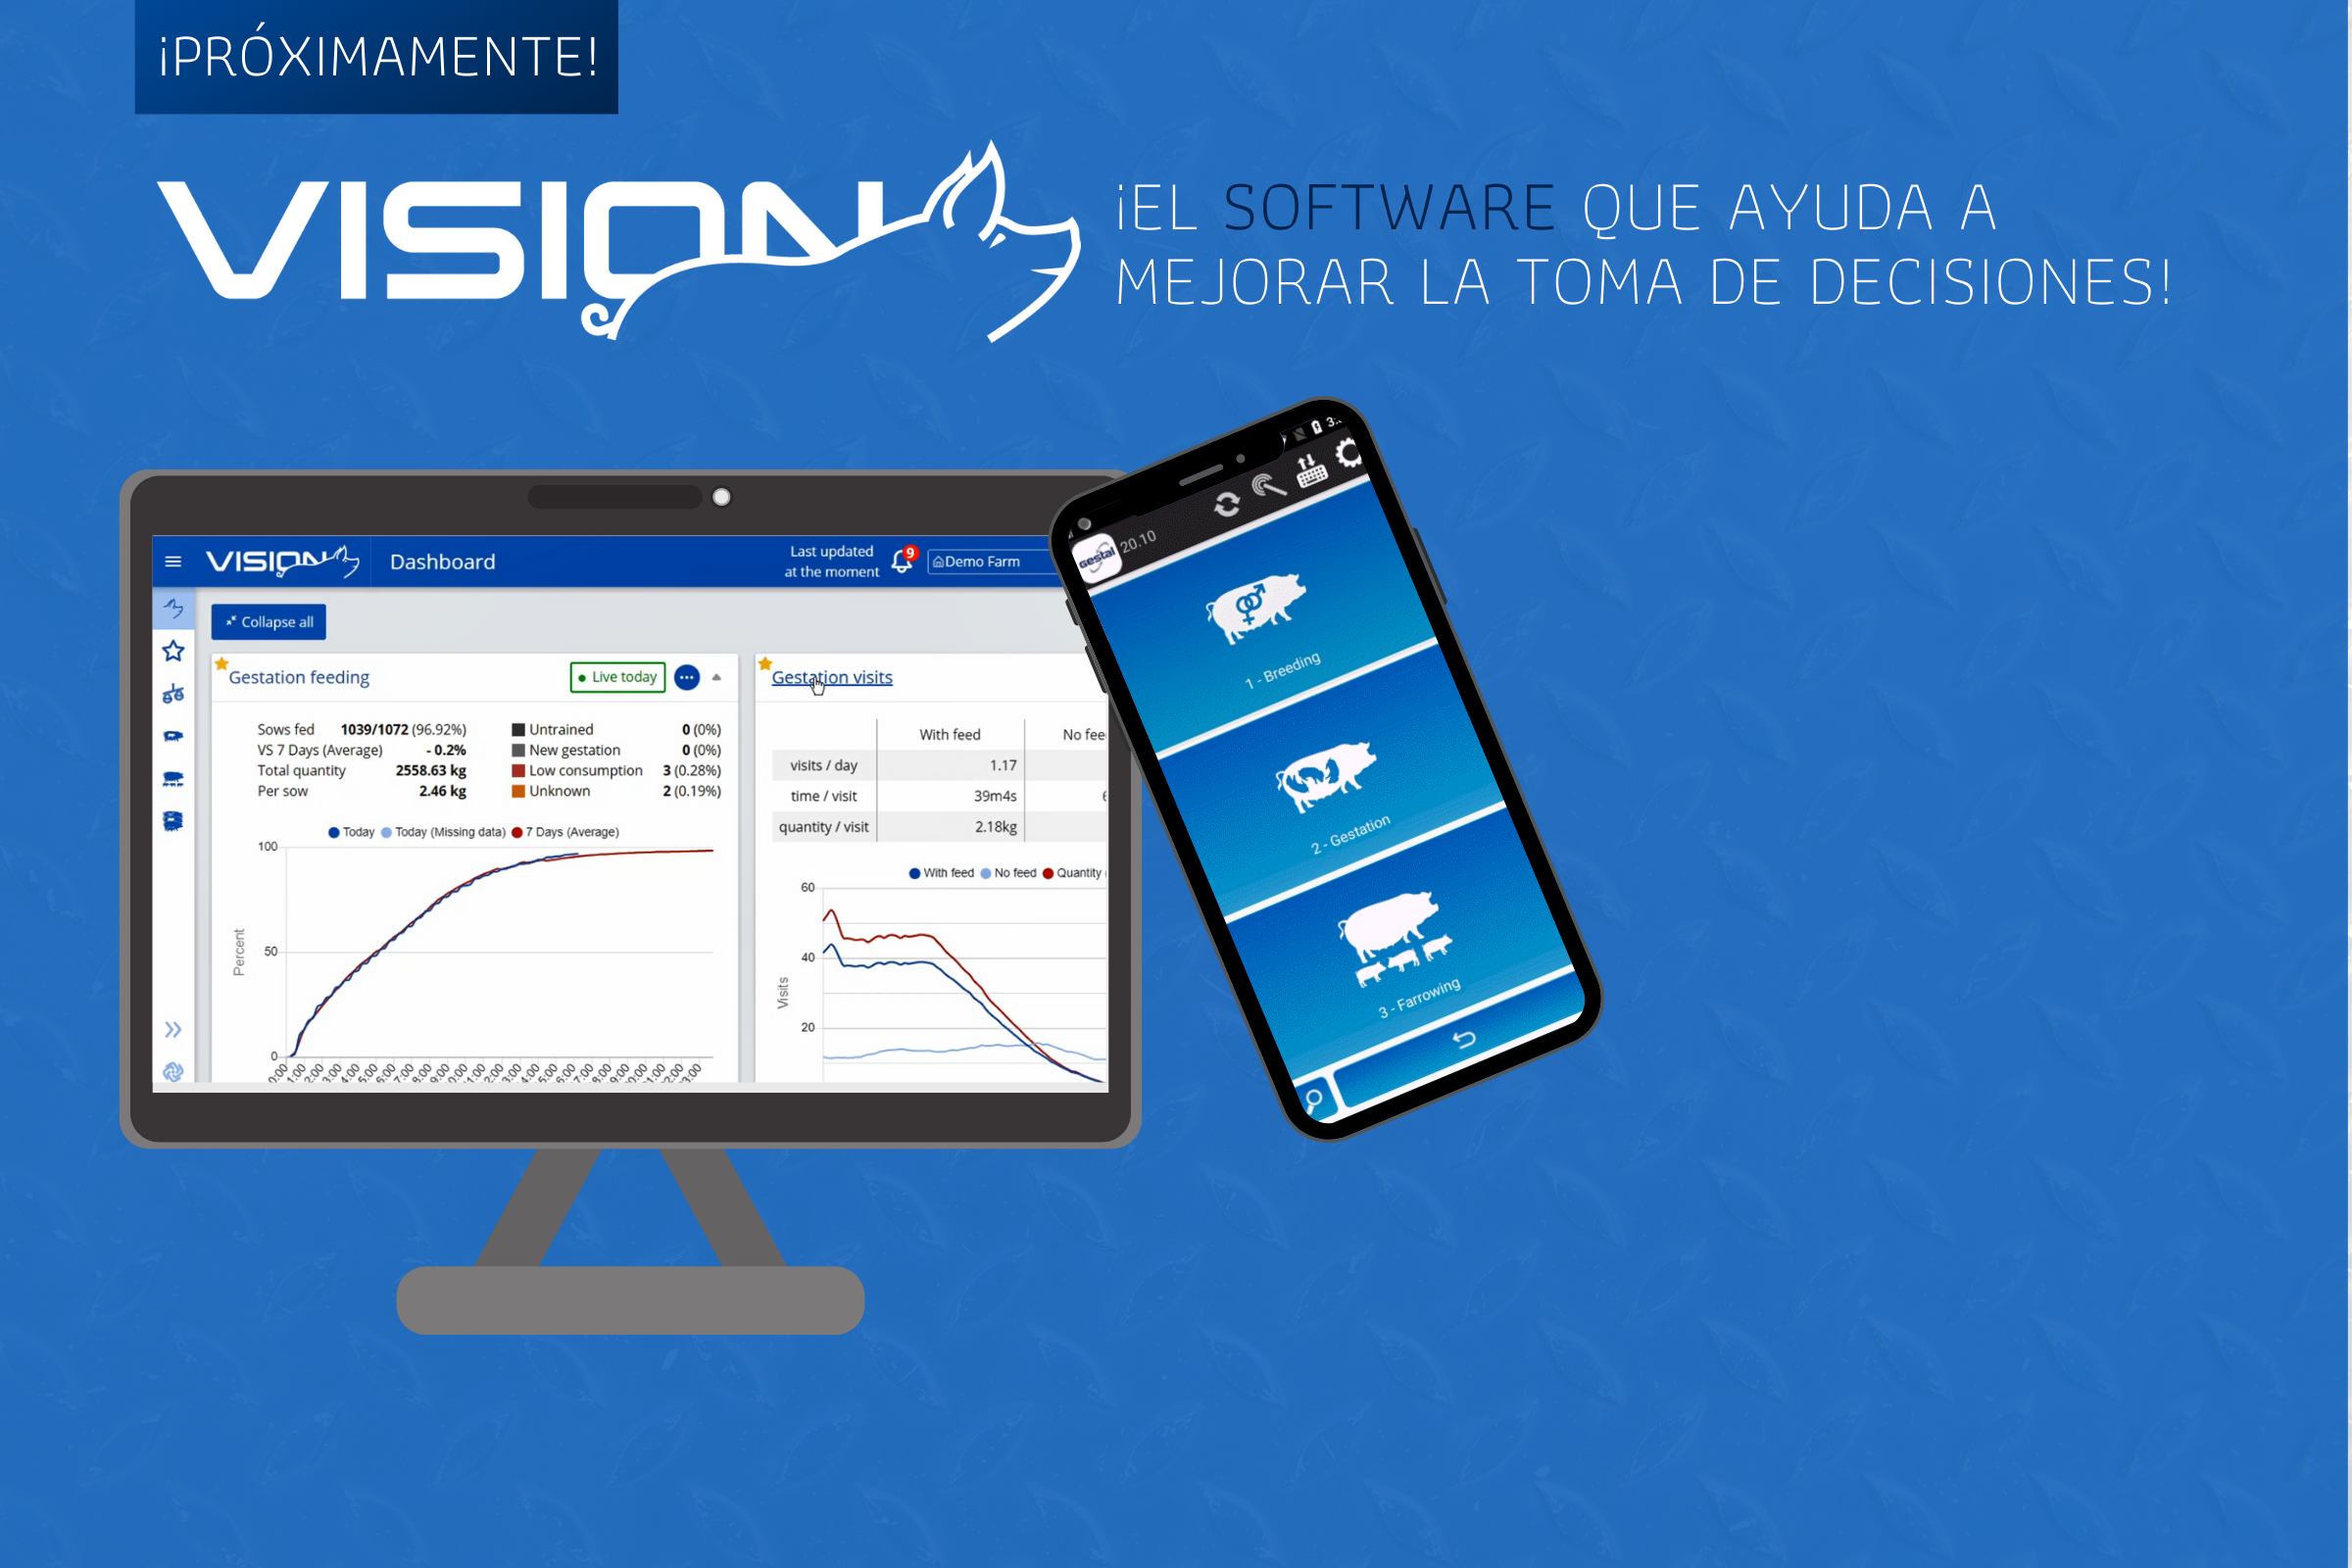 Vision - feed and herd management software